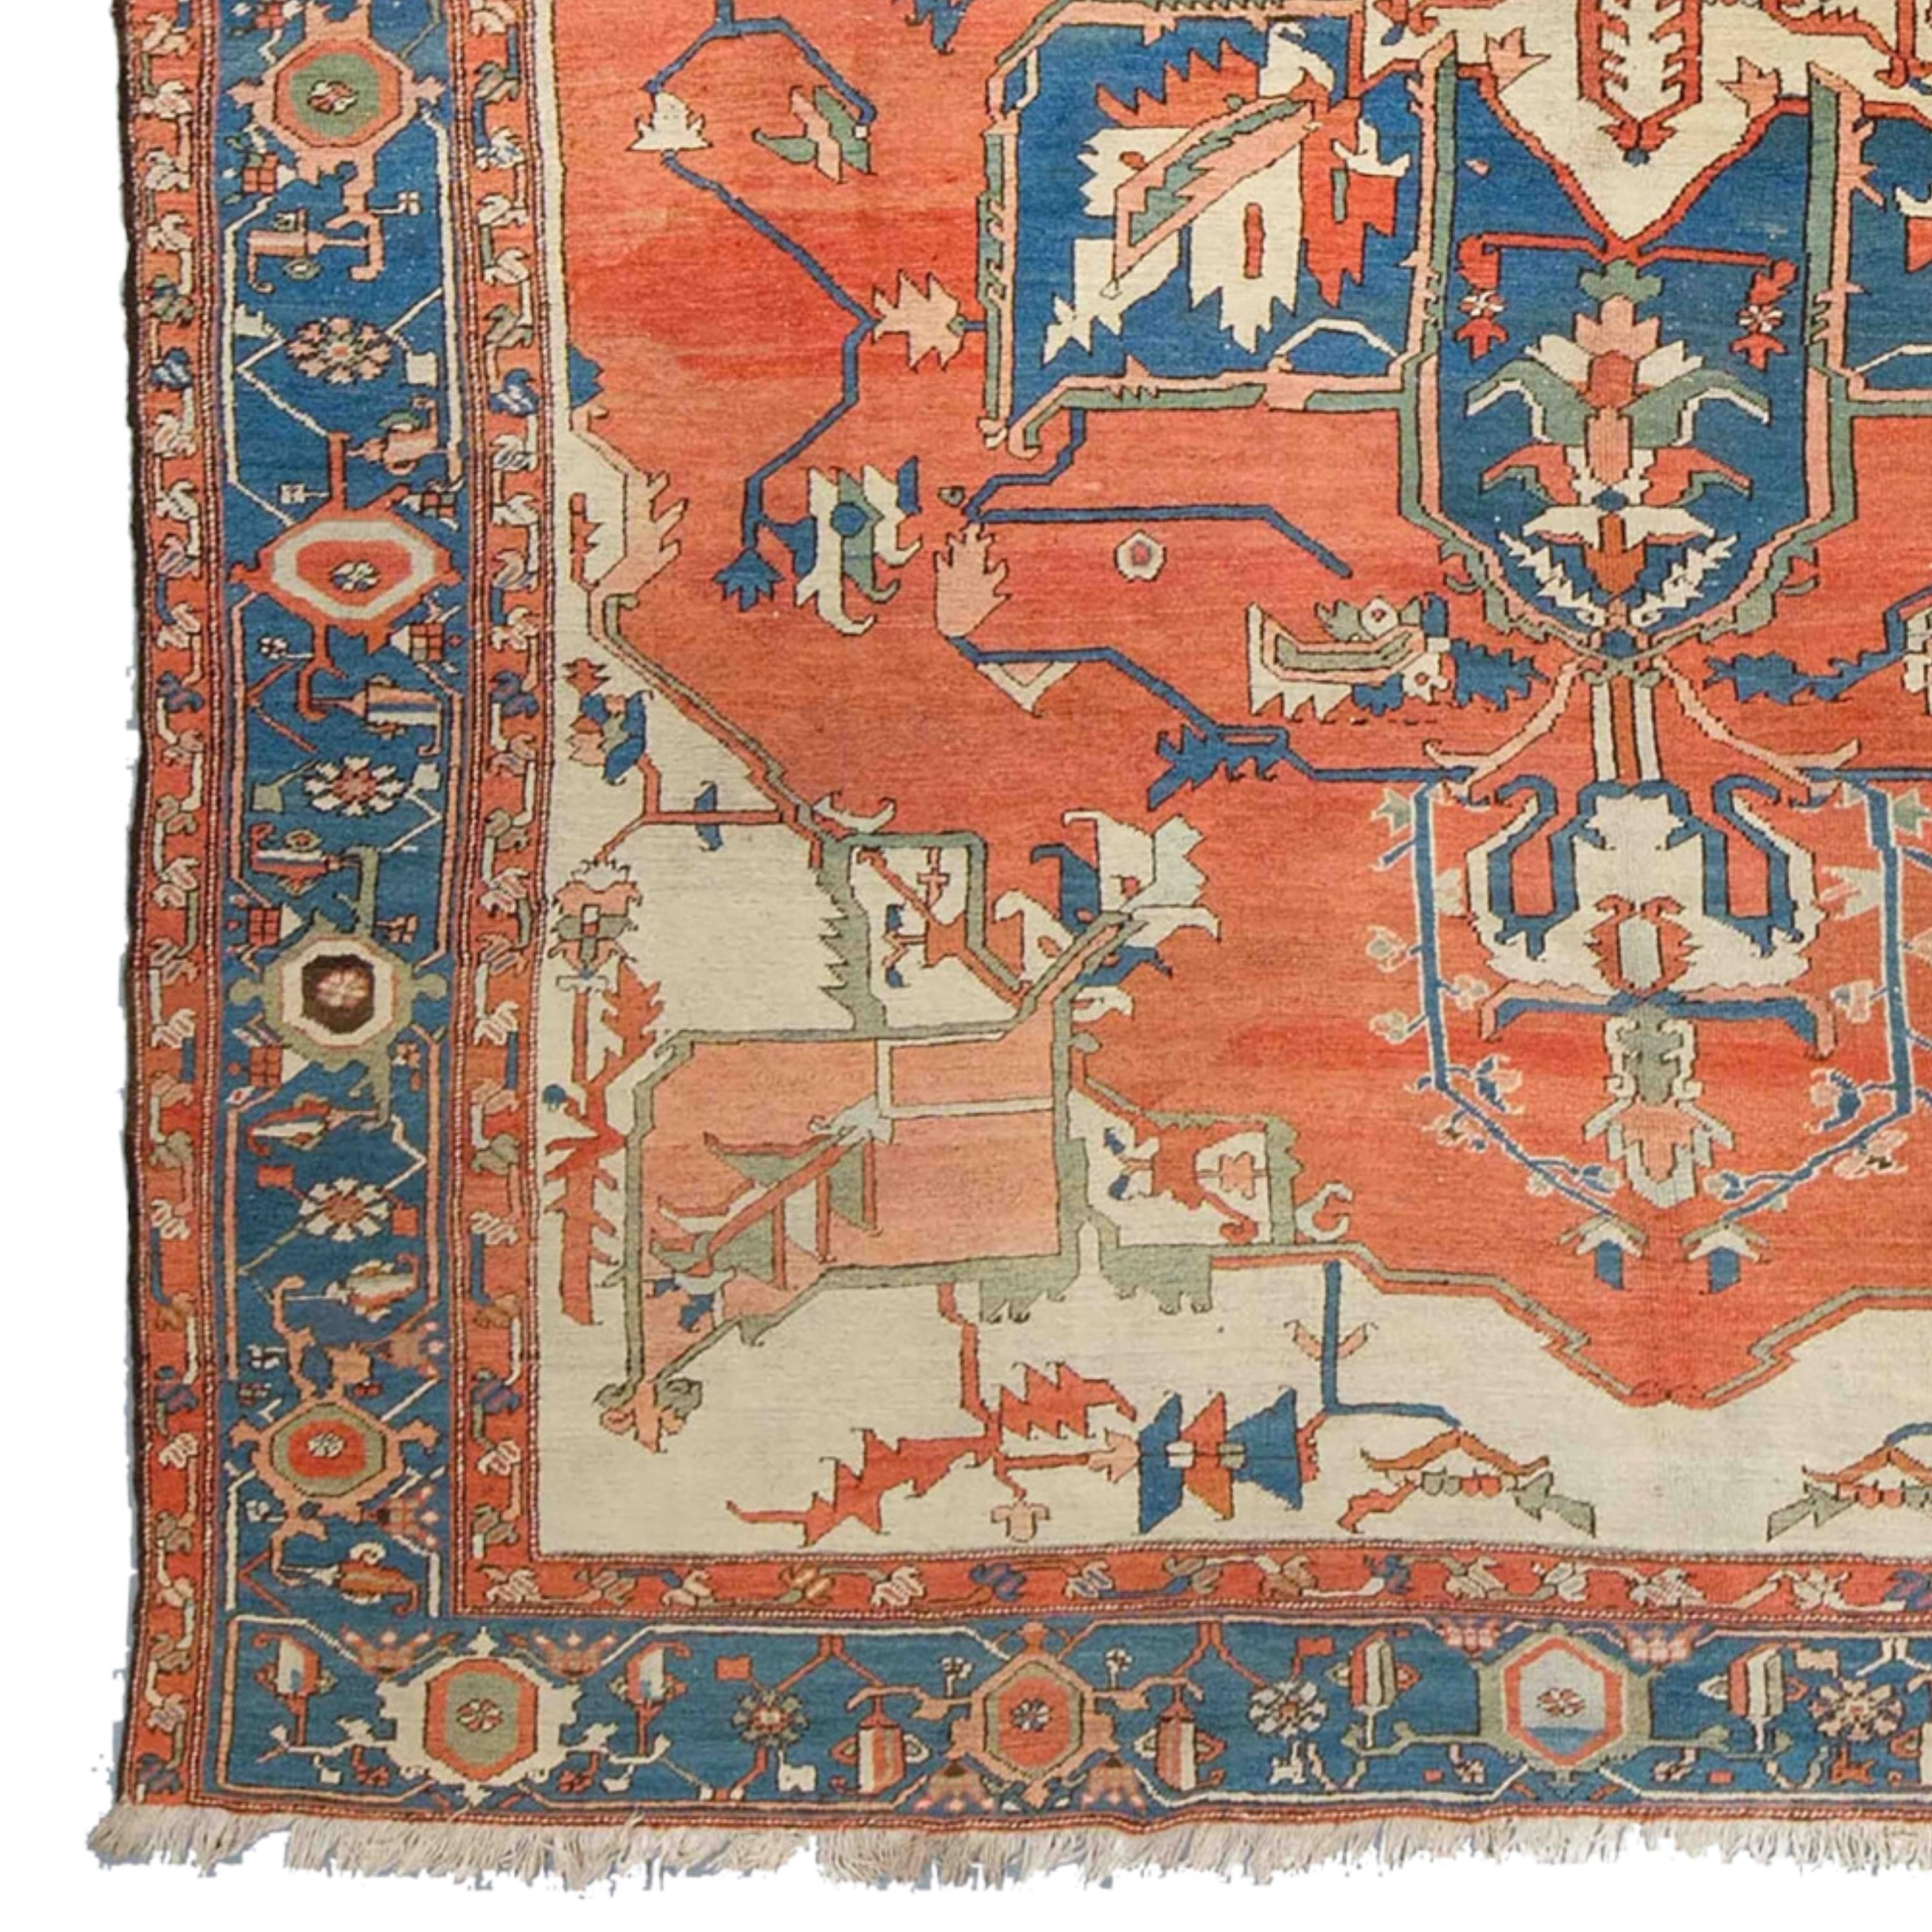 19th Century Serapi Carpet
Size: 282x423 cm

This impressive 19th-century Serapi Tapestry is a masterpiece reflecting the elegant and sophisticated craftsmanship of a historic period.

Rich Patterns: The carpet is decorated with intricate floral